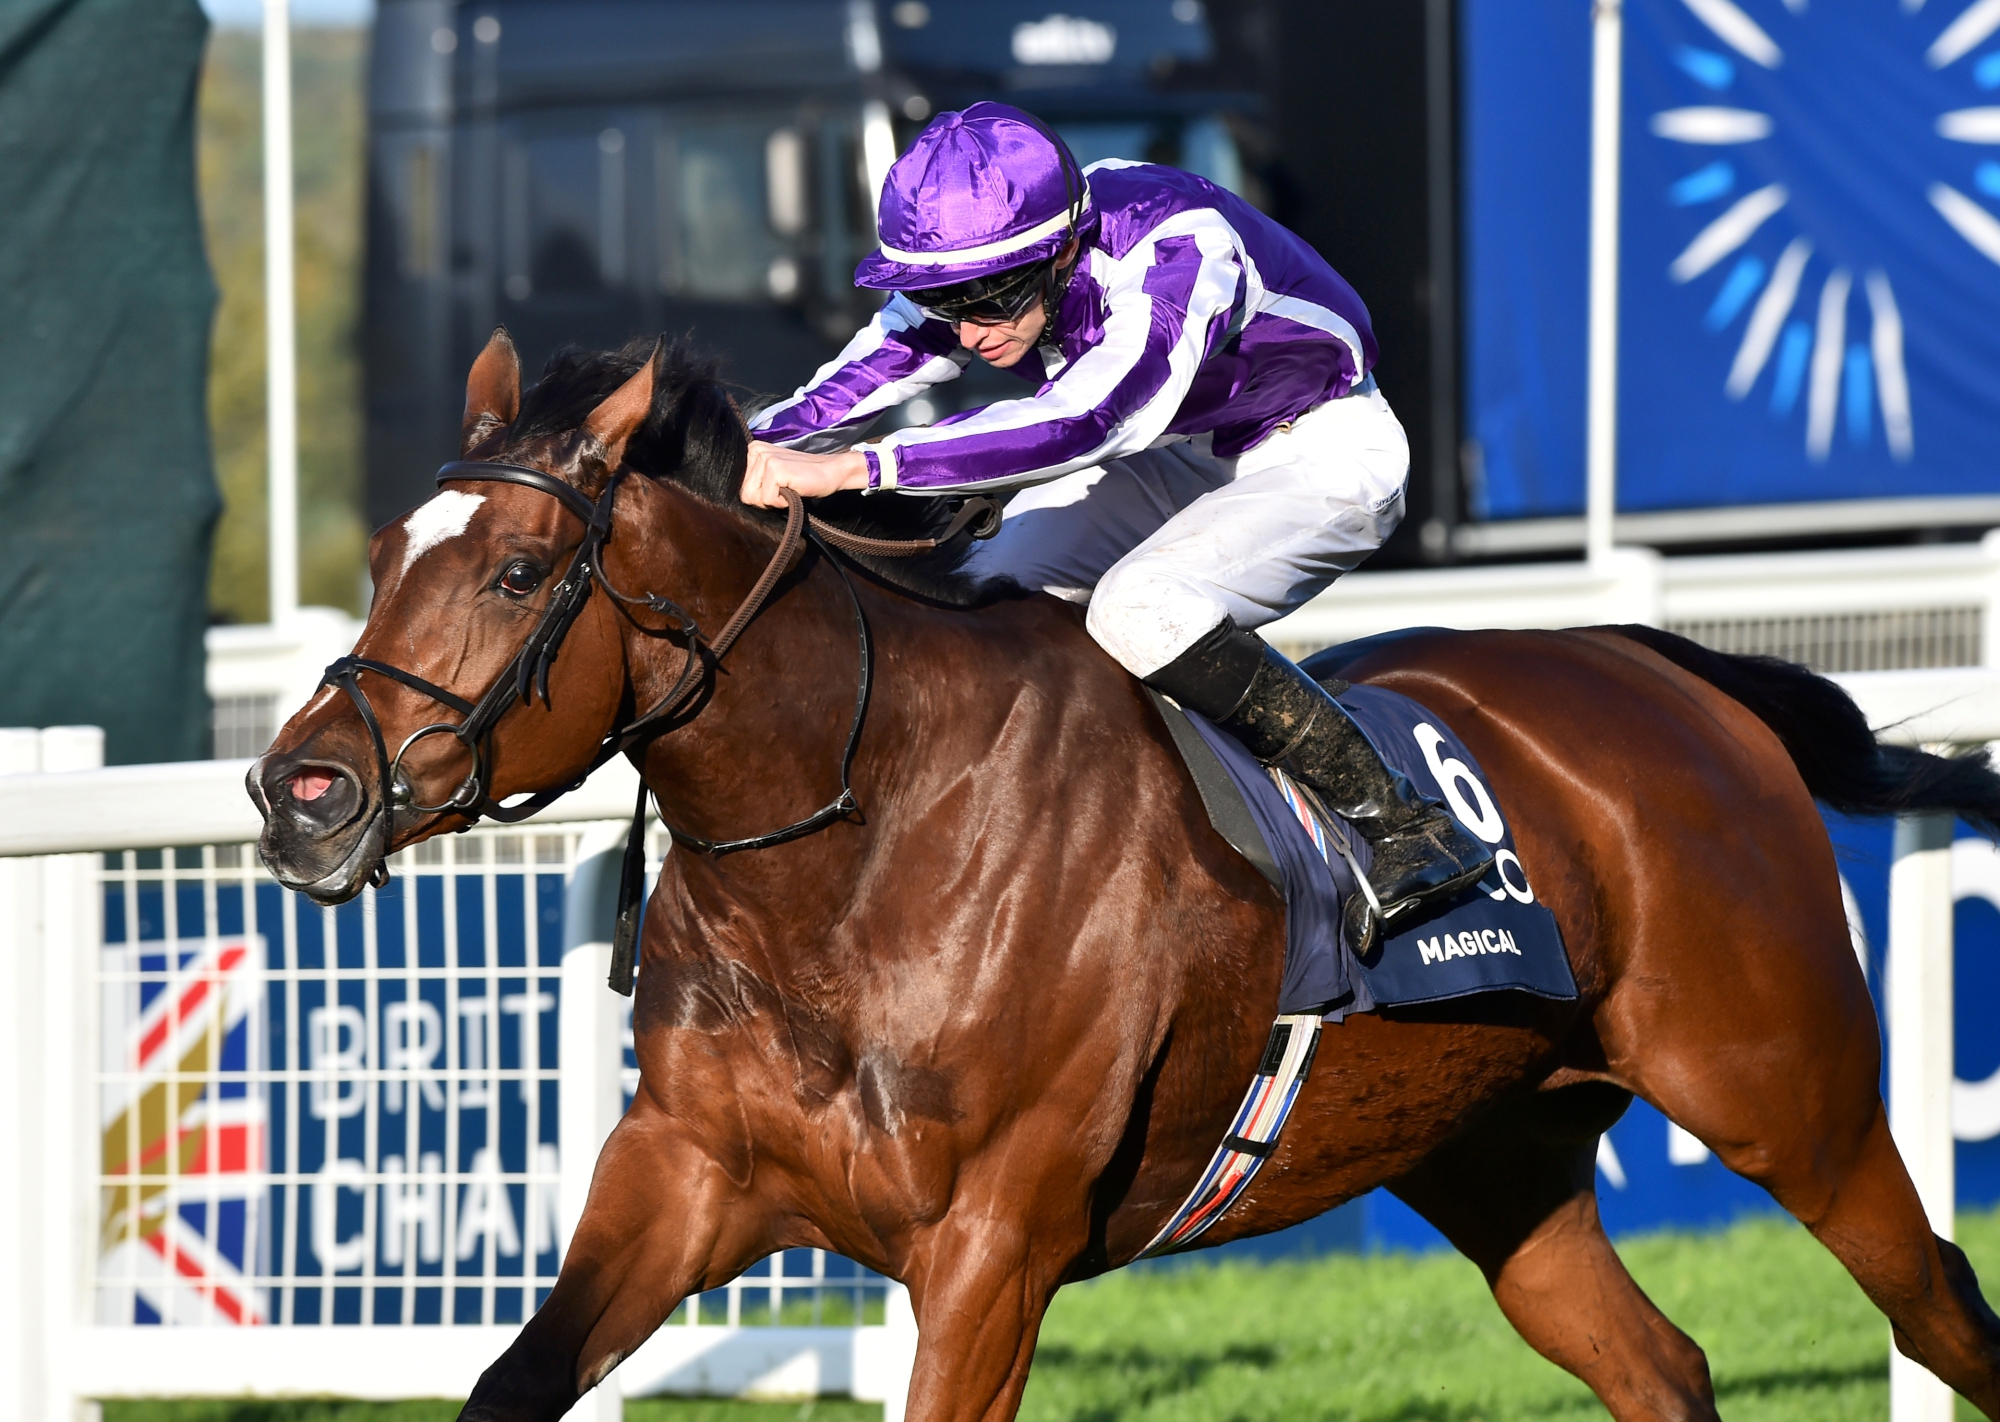 Magical – IRE : Aidan O’Brien’s brilliant seven-time G1 winner who holds a win over the World’s Best Racehorse Ghaiyyath three starts ago in Irish Champion Stakes.